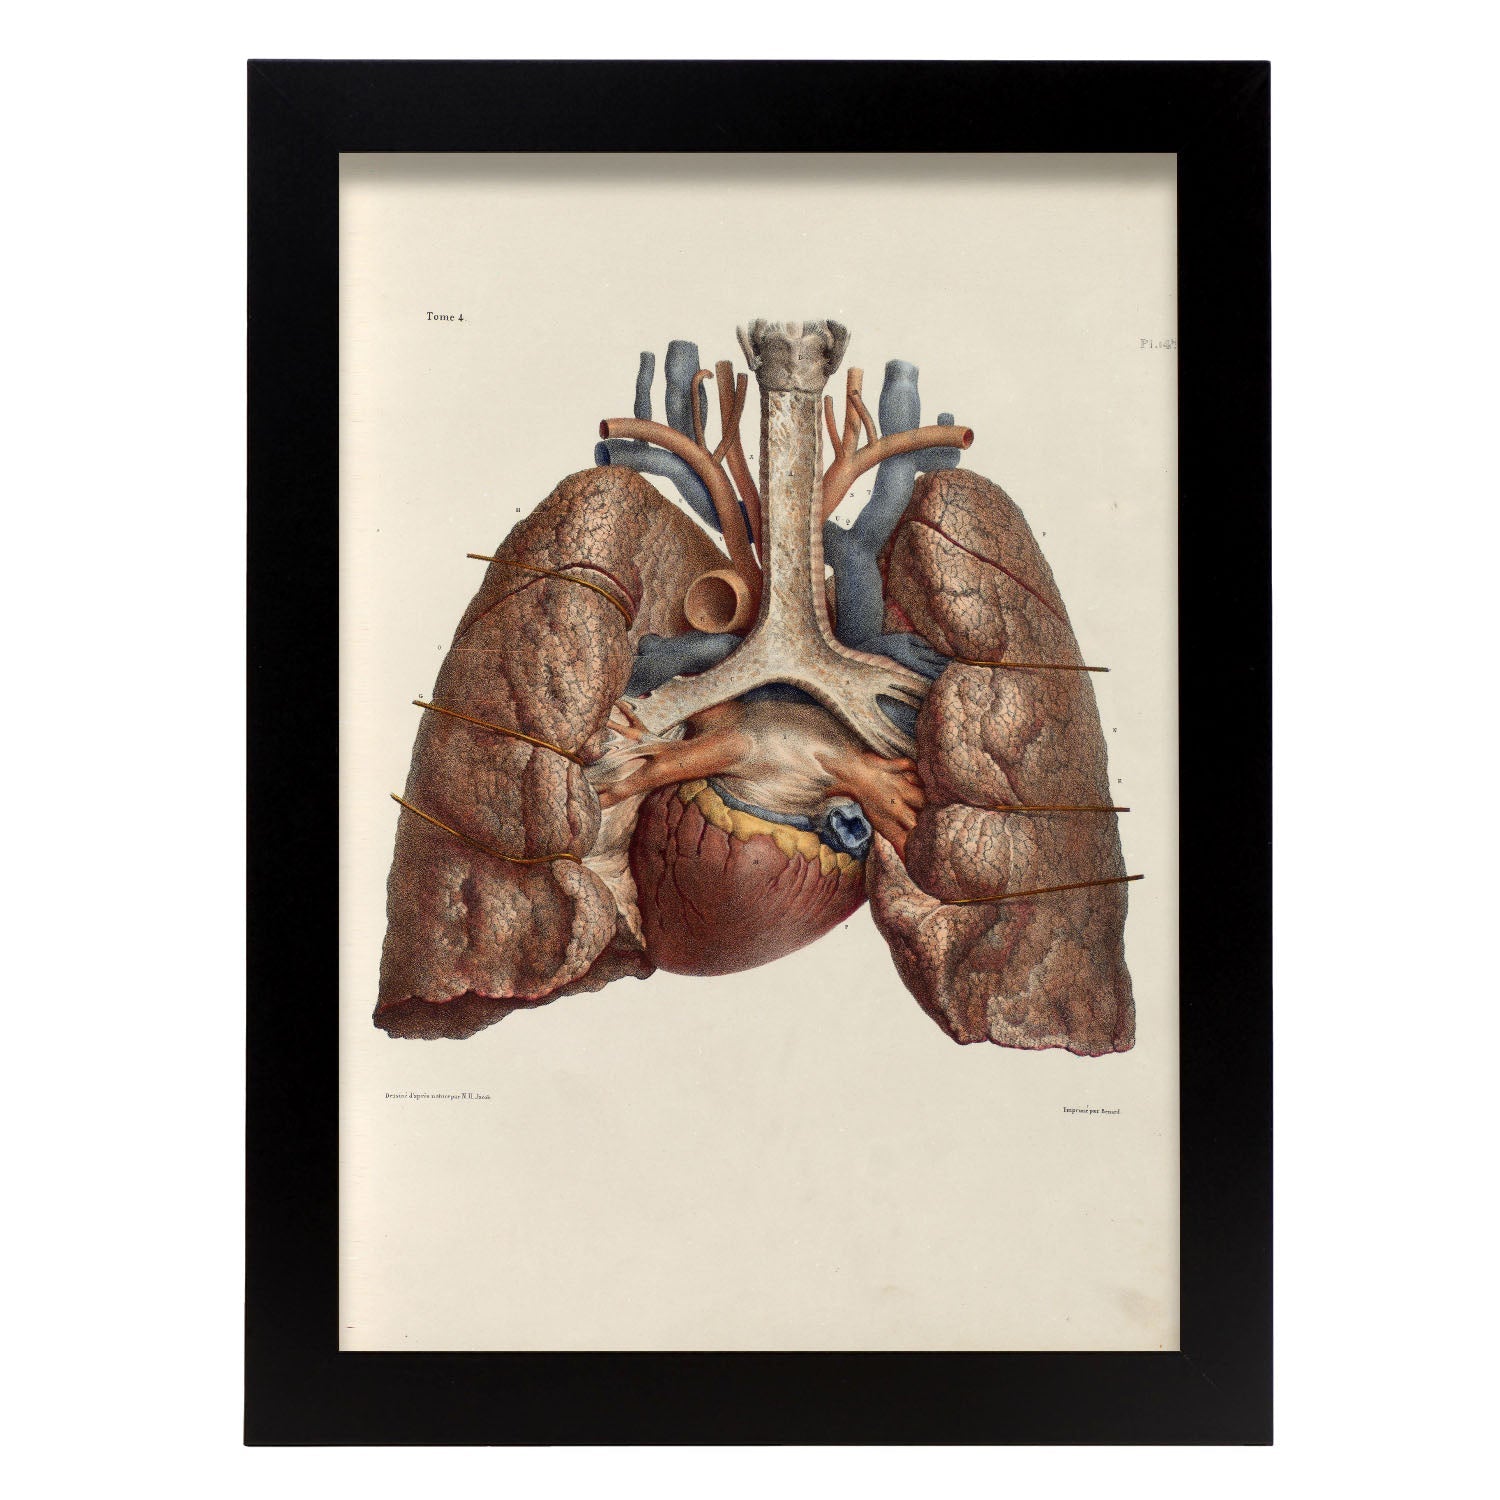 Heart, lungs, trachea and laryngeal cartilages-Artwork-Nacnic-A4-Sin marco-Nacnic Estudio SL